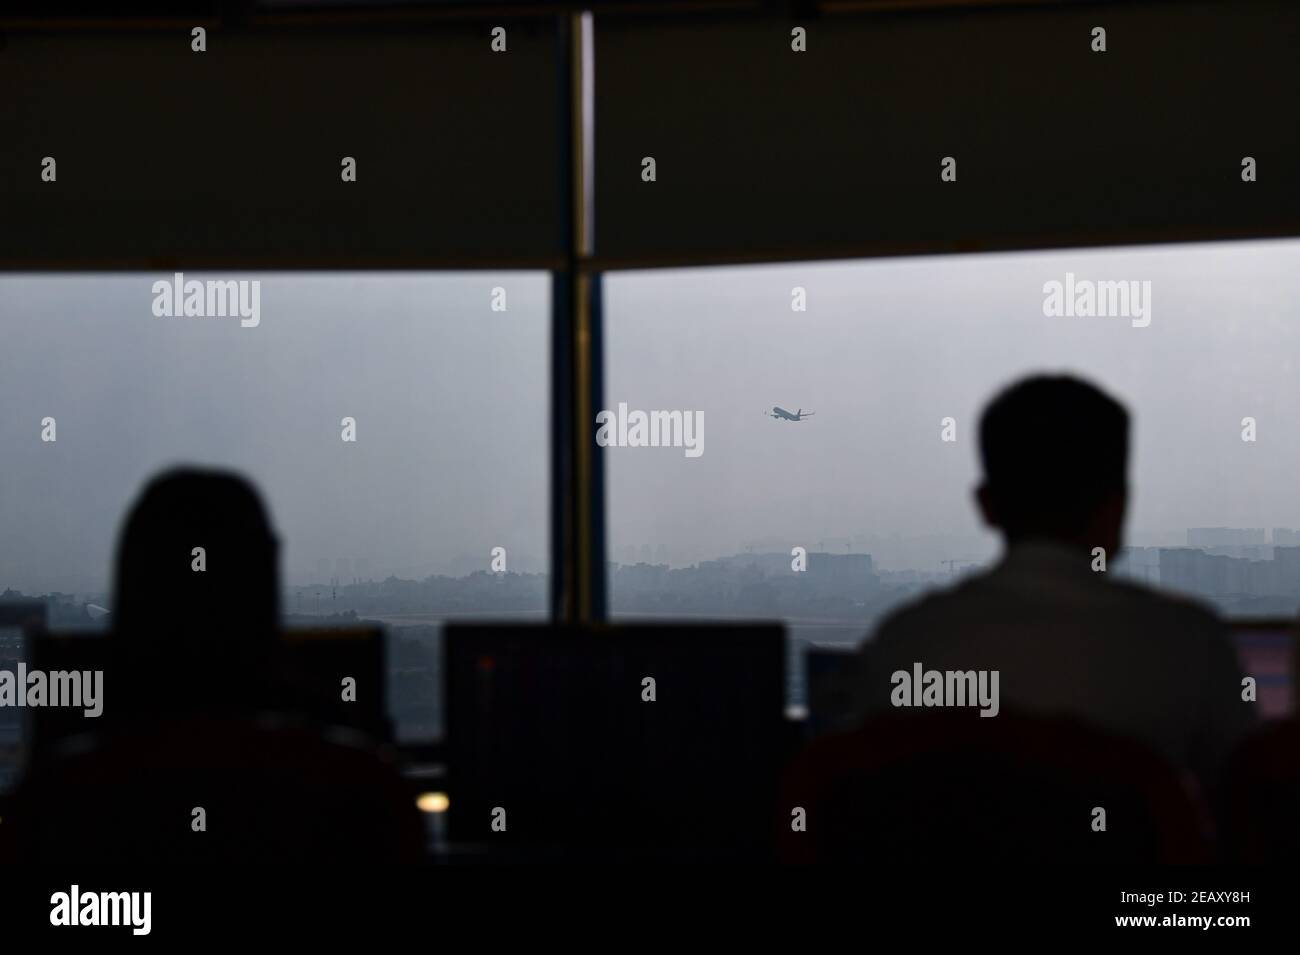 (210211) -- SANYA, Feb. 11, 2021 (Xinhua) -- A plane takes off at the Sanya Phoenix International Airport under the guidance of air traffic controllers in Sanya, south China's Hainan Province, Jan. 28, 2021. Hong Yuan, 29, is an air traffic controller at Sanya Air Traffic Control Tower. As an air traffic controller, Hong is responsible for navigating the air traffic, guiding pilots during takeoff and landing, and monitoring the planes as they travel through the skies. This job requires high attentiveness. Staff members are accordingly supposed to take a break every two hours to recover from Stock Photo